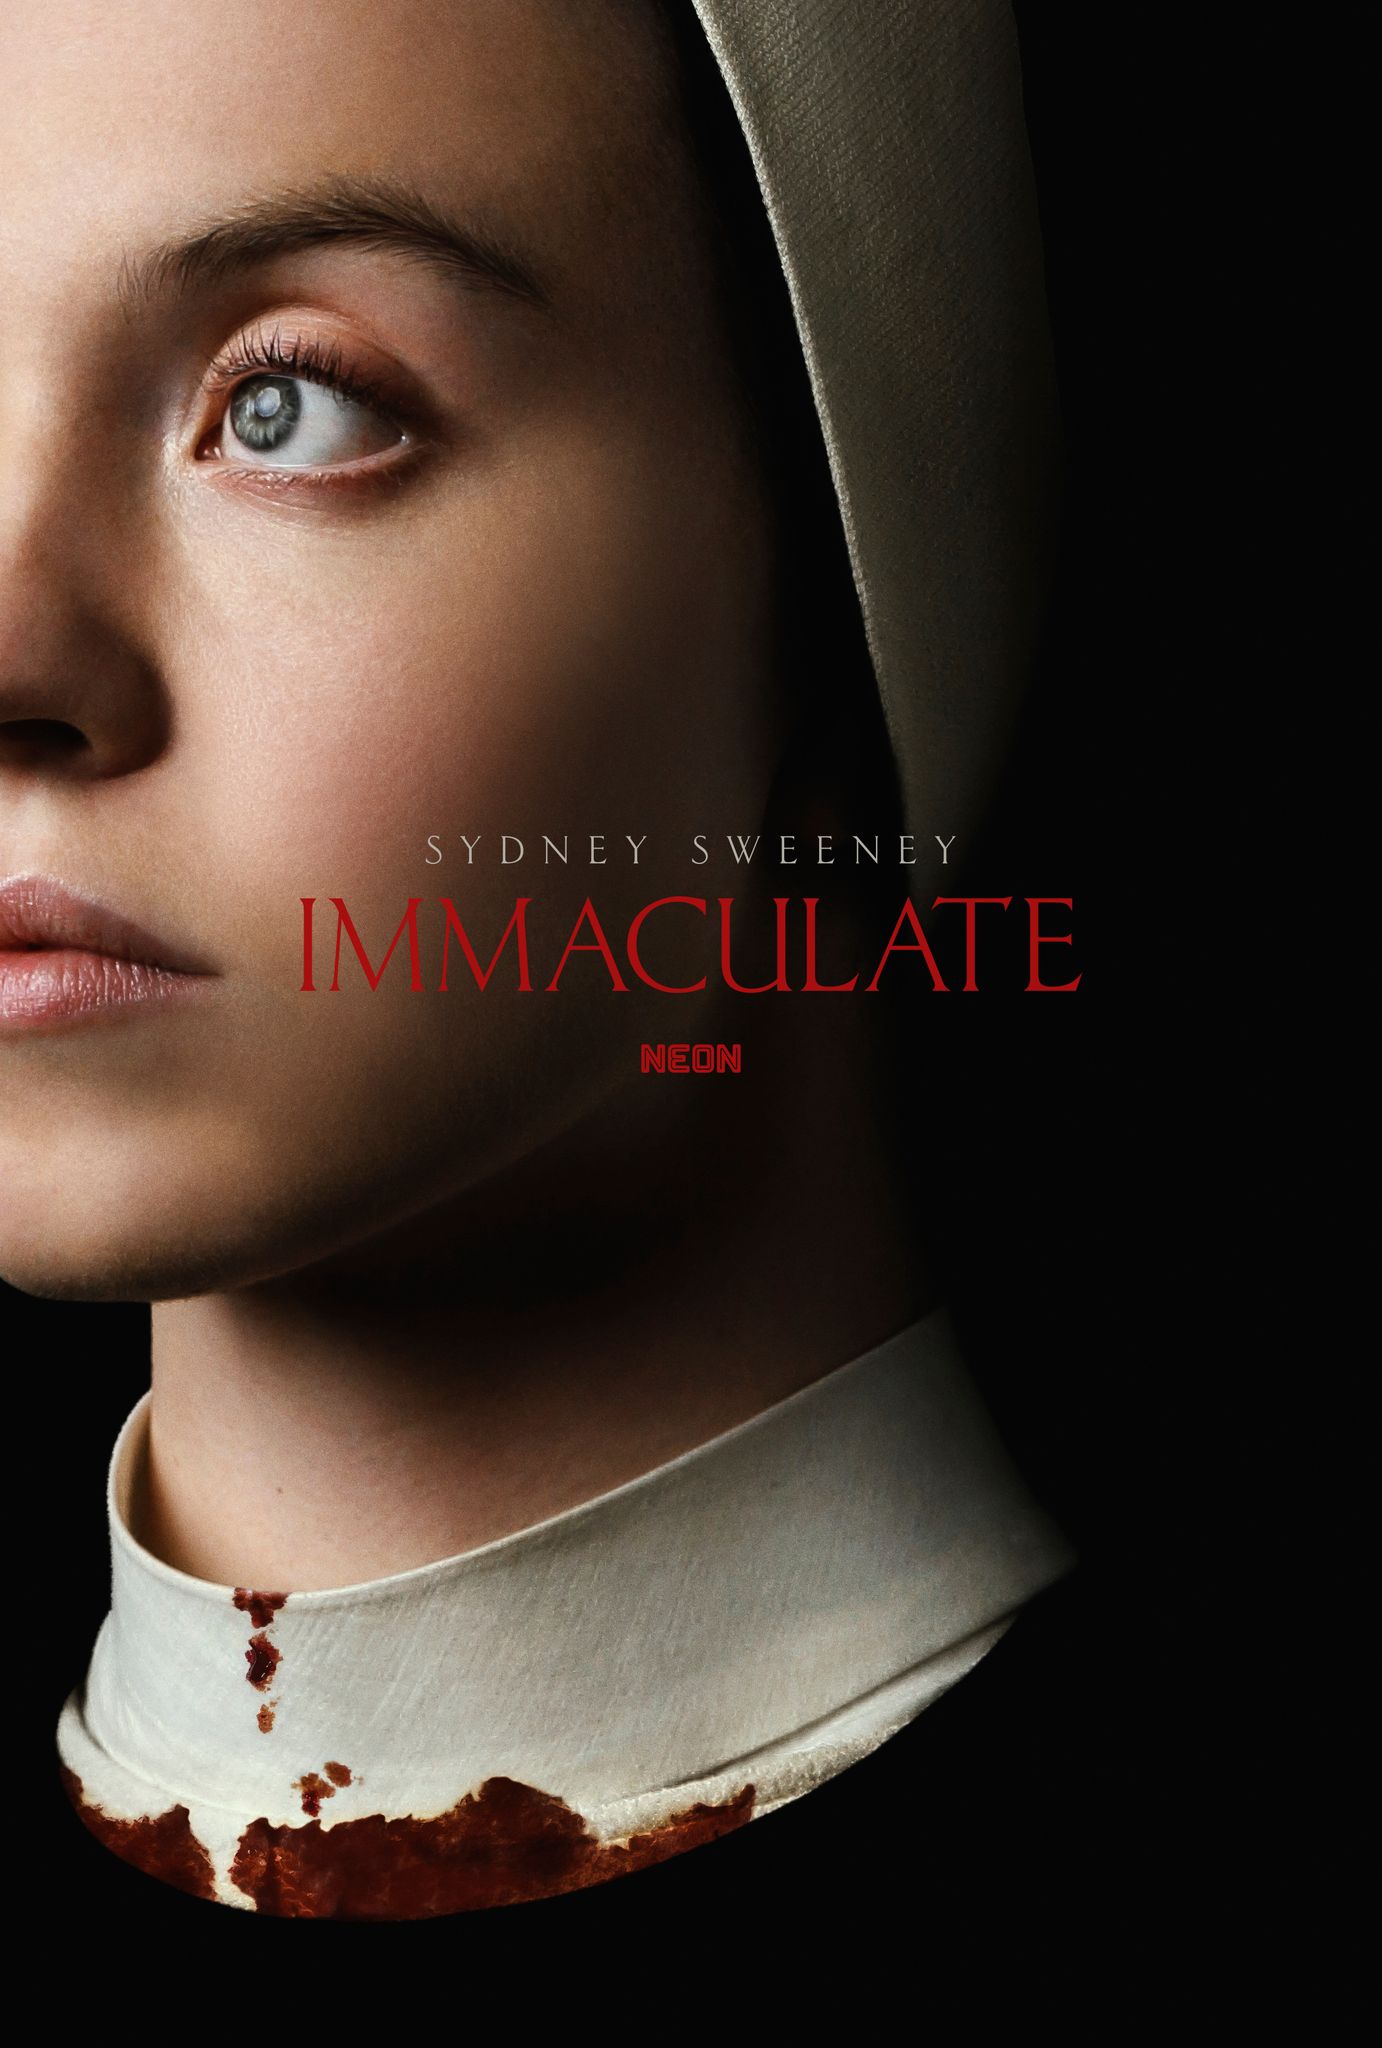 Immaculate Movie Poster Showing Sydney Sweeney Dressed as a Nun with Blood Around Her Collar